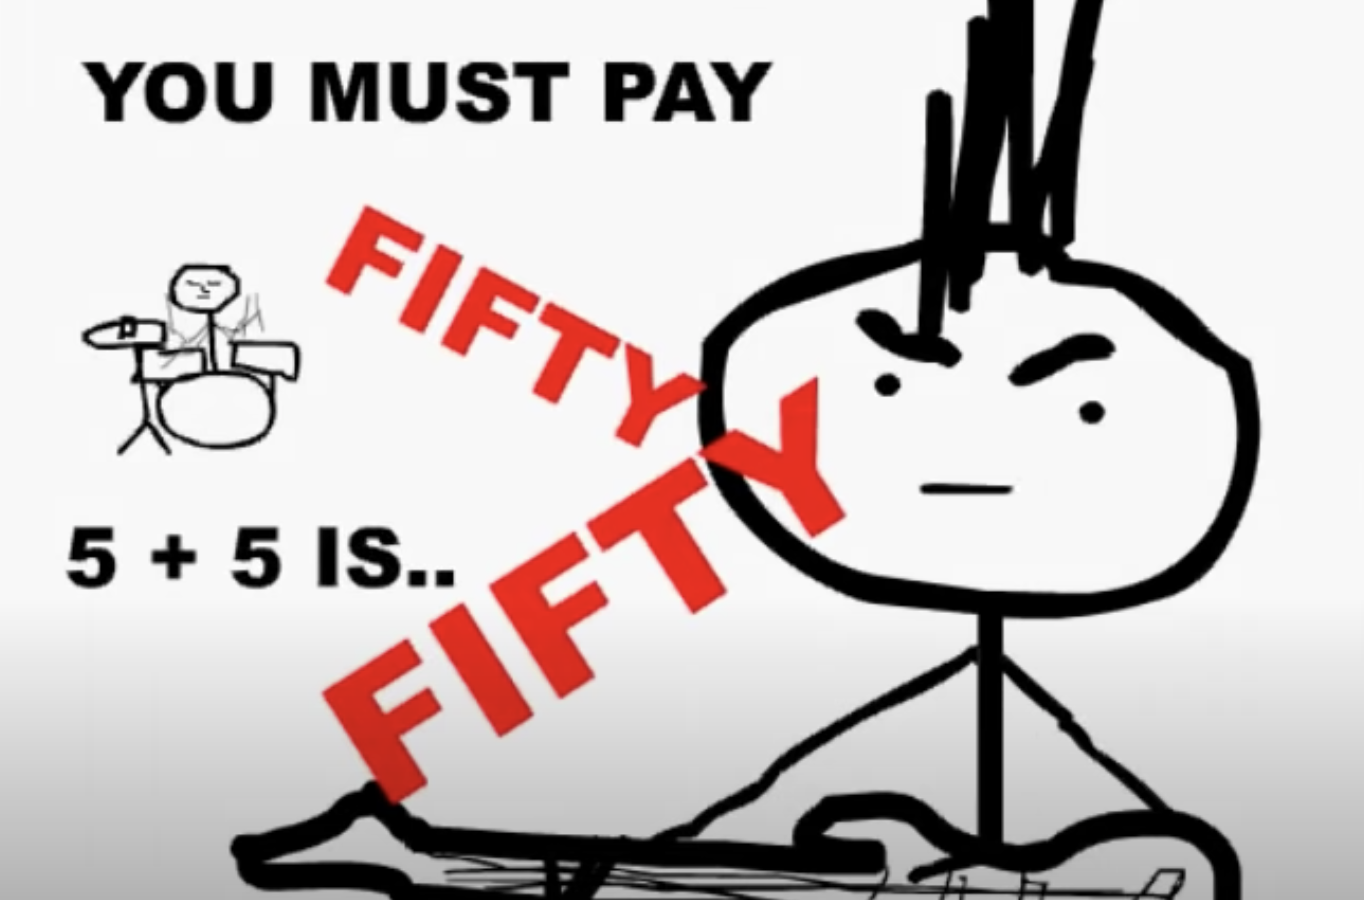 &quot;You must pay fifty-five&quot; and &quot;5+5 is fifty-five&quot; with a drawing of a man on guitar and a man on drums